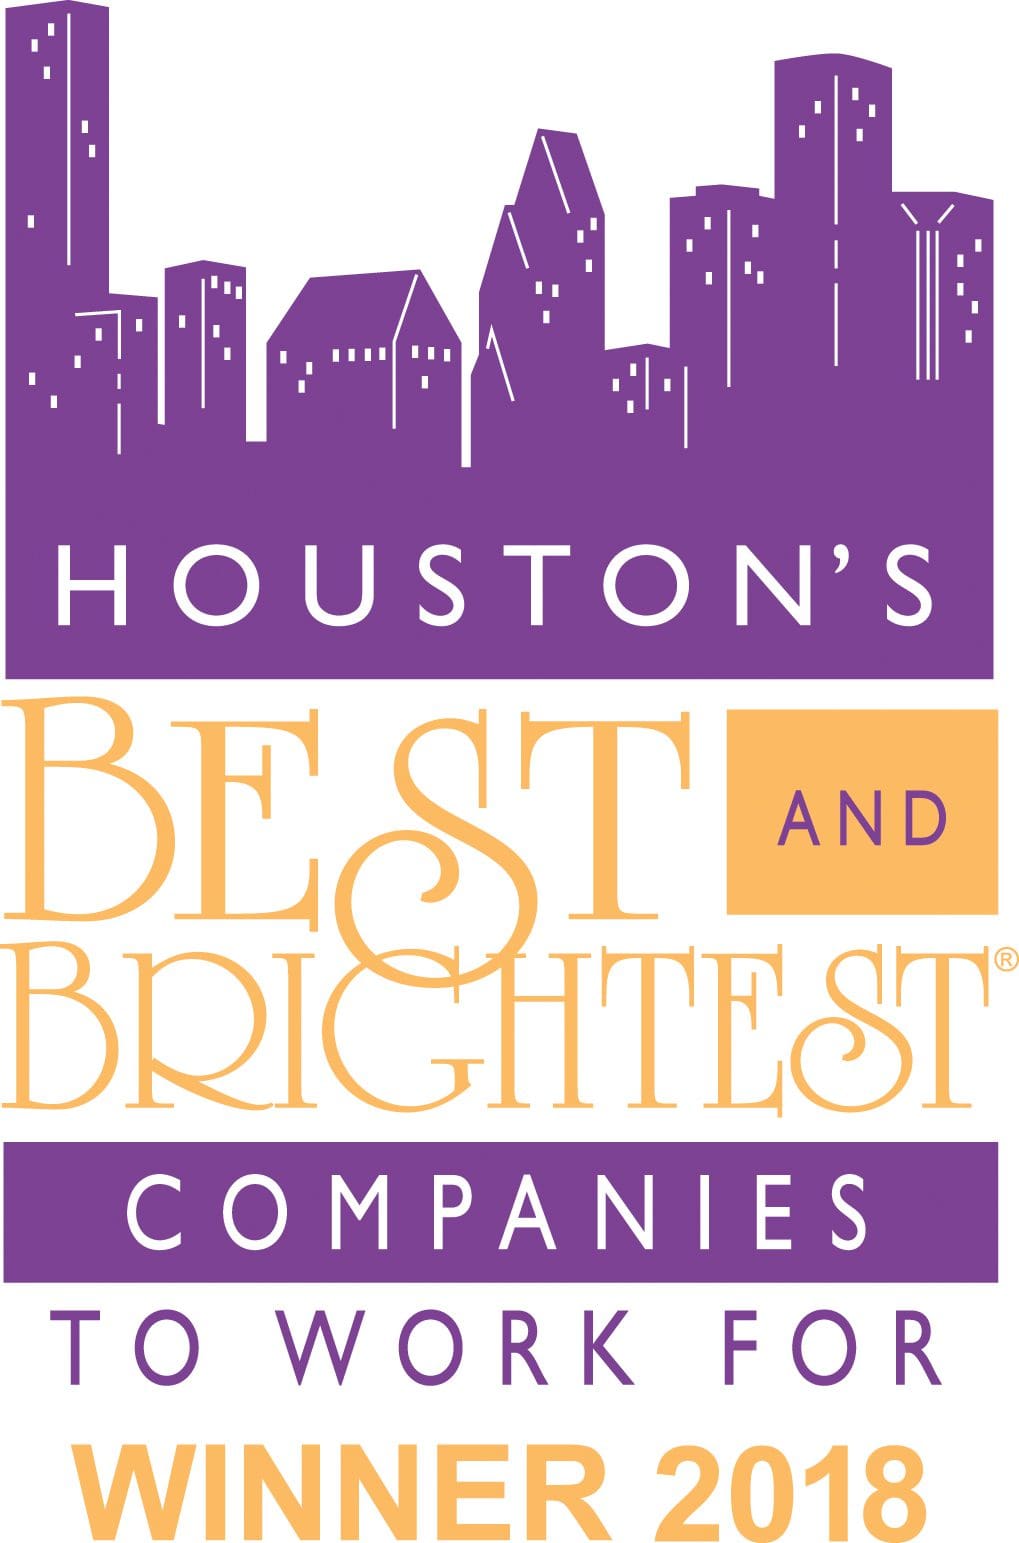 Sun Coast Resources, Inc. Named as One of Houston's Best And Brightest Companies To Work For